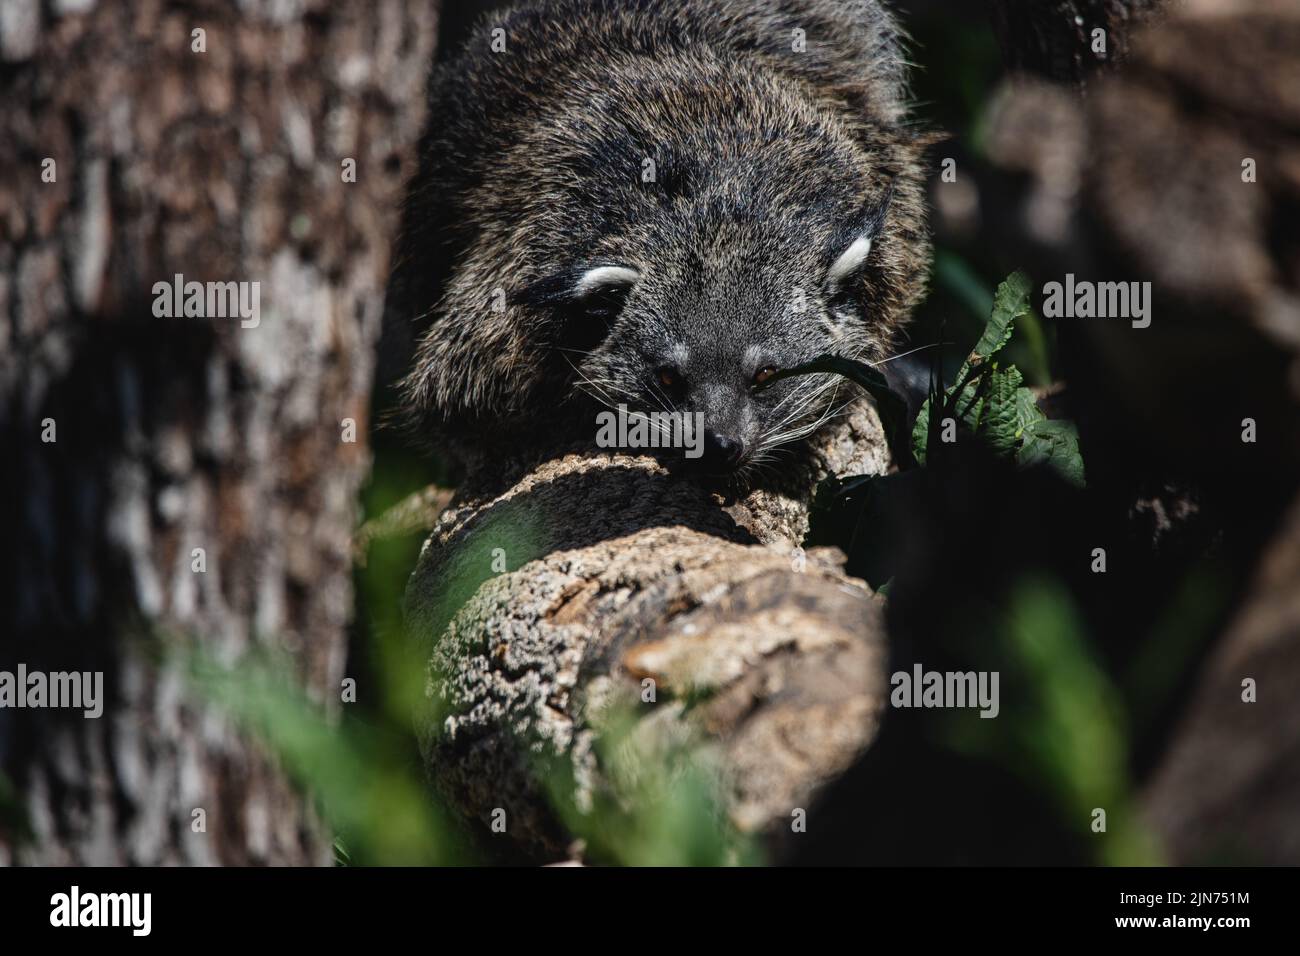 Portrait of a hidden adult bearcat perched on a branch Stock Photo